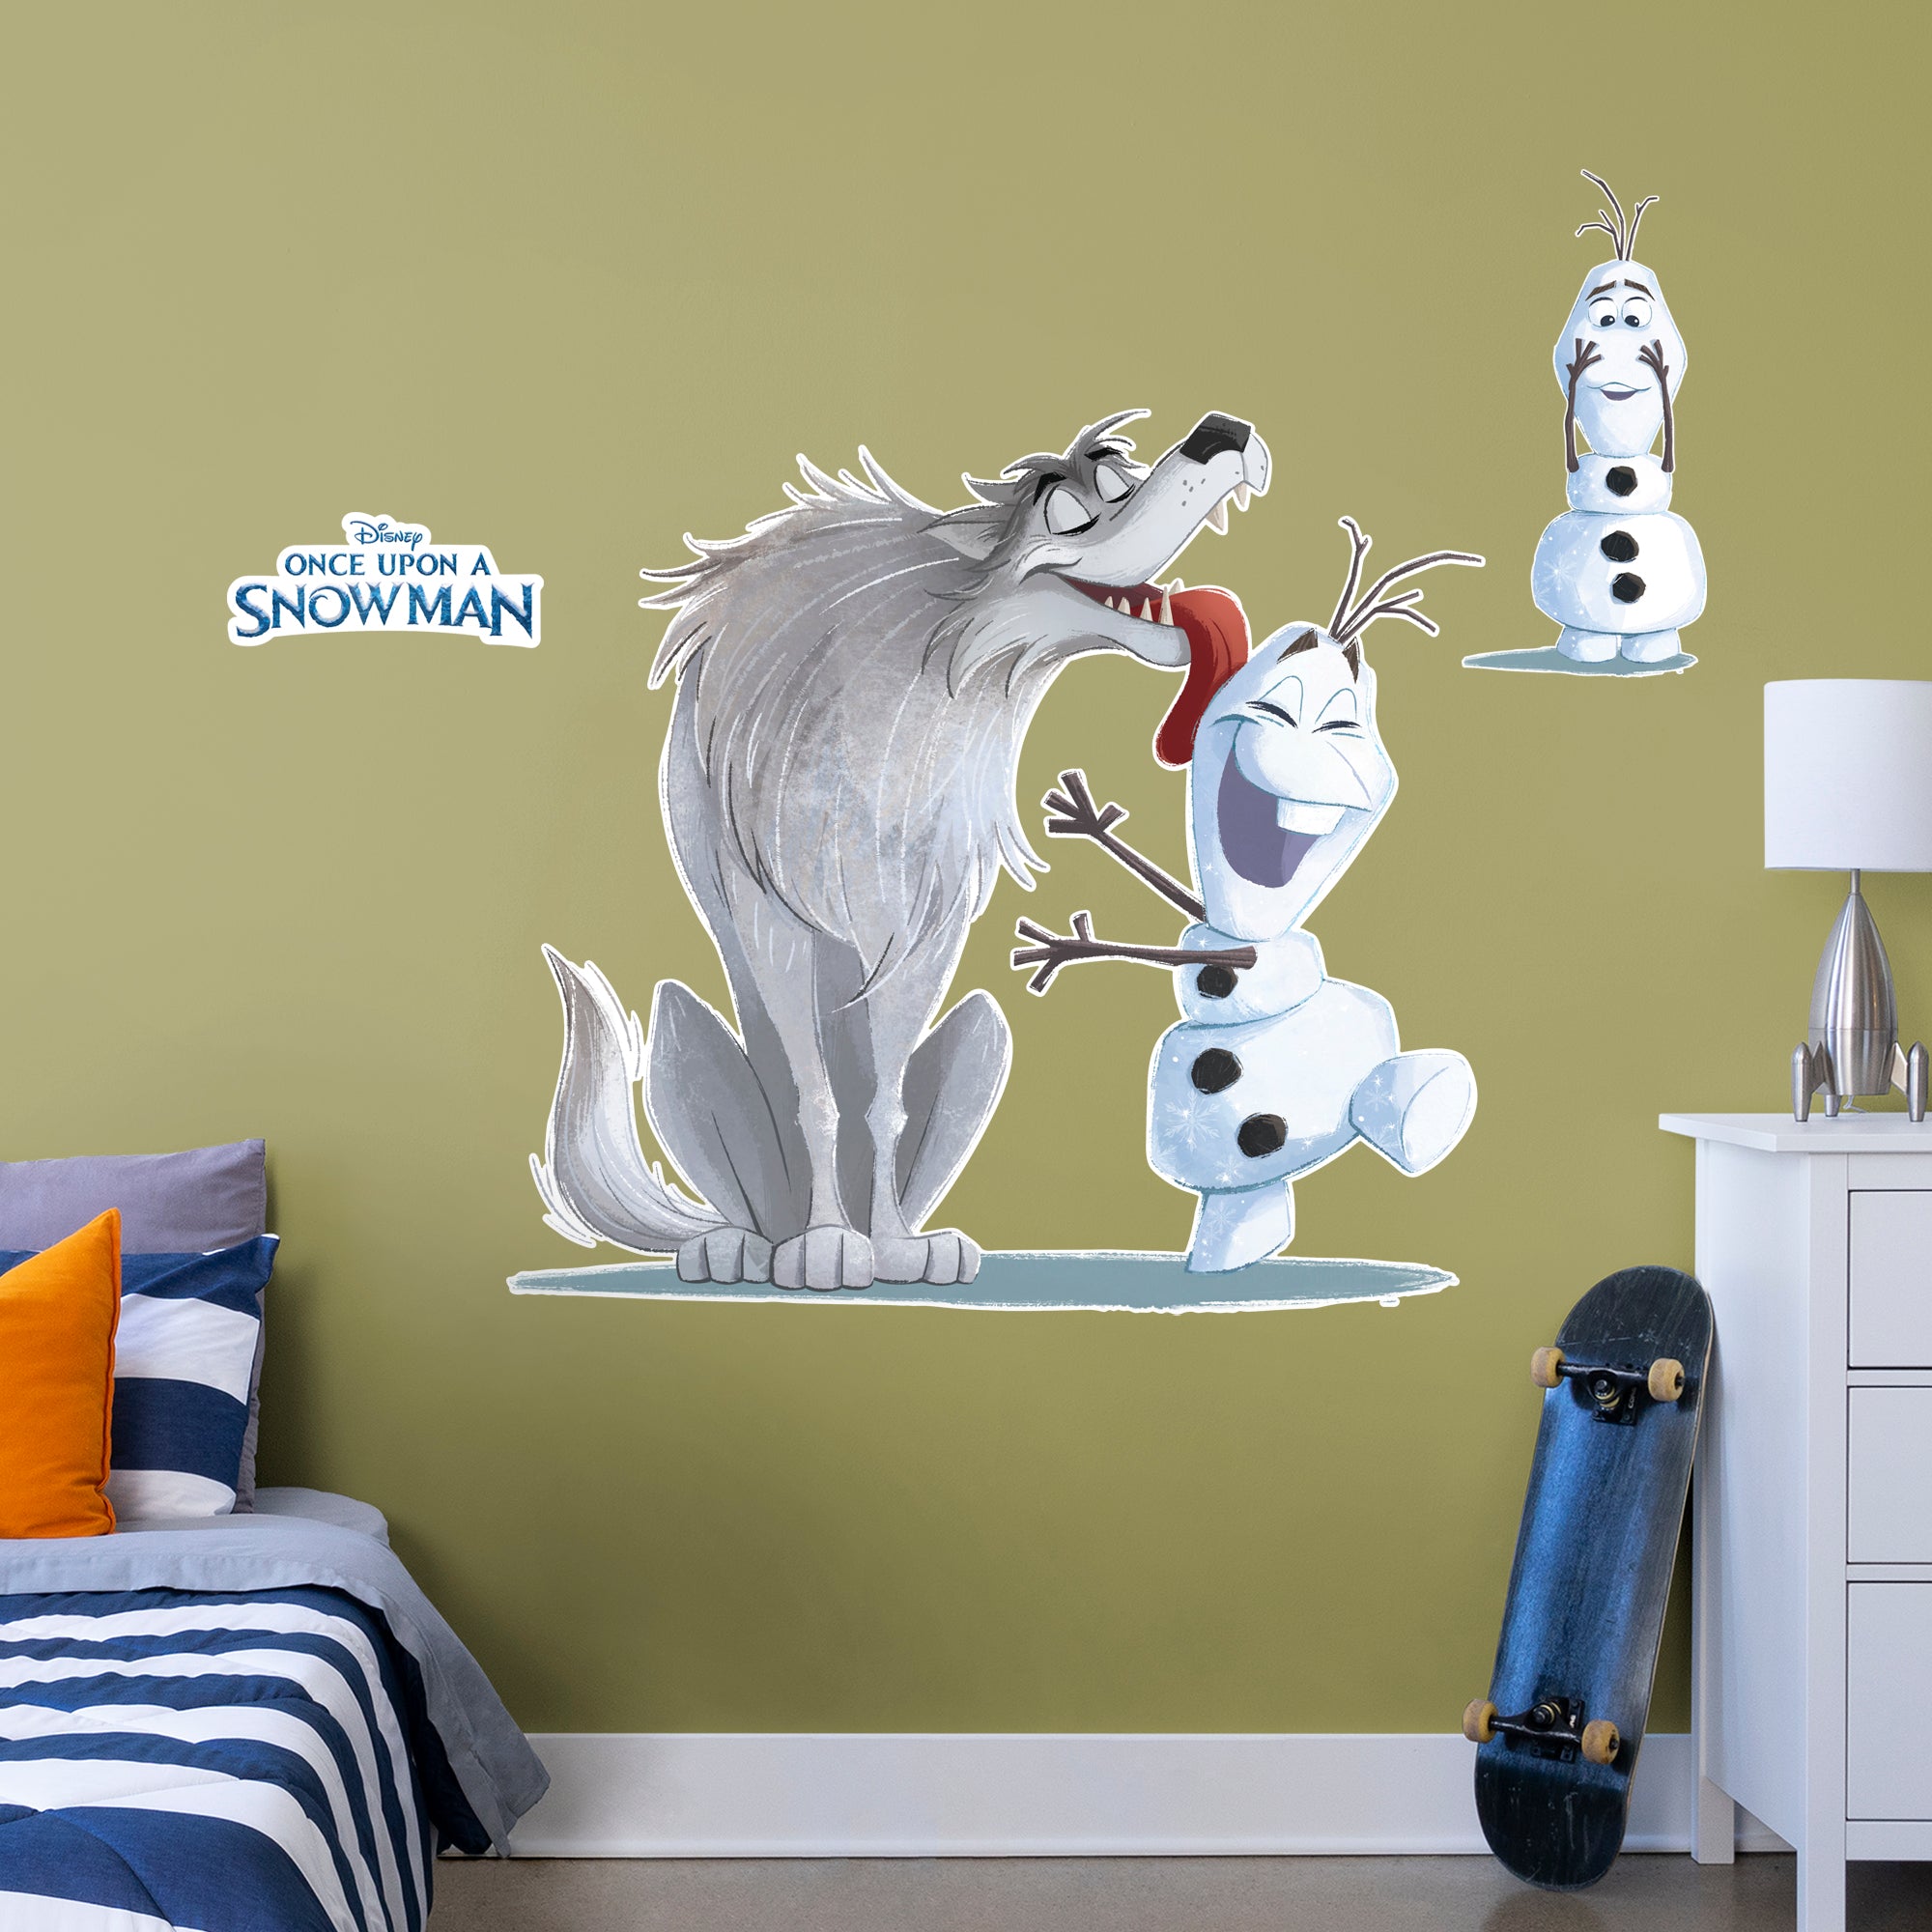 Olaf: Wolf - Once Upon A Snowman Officially Licensed Disney Removable Wall Decal Life-Size Character + 2 Decals by Fathead | Vin